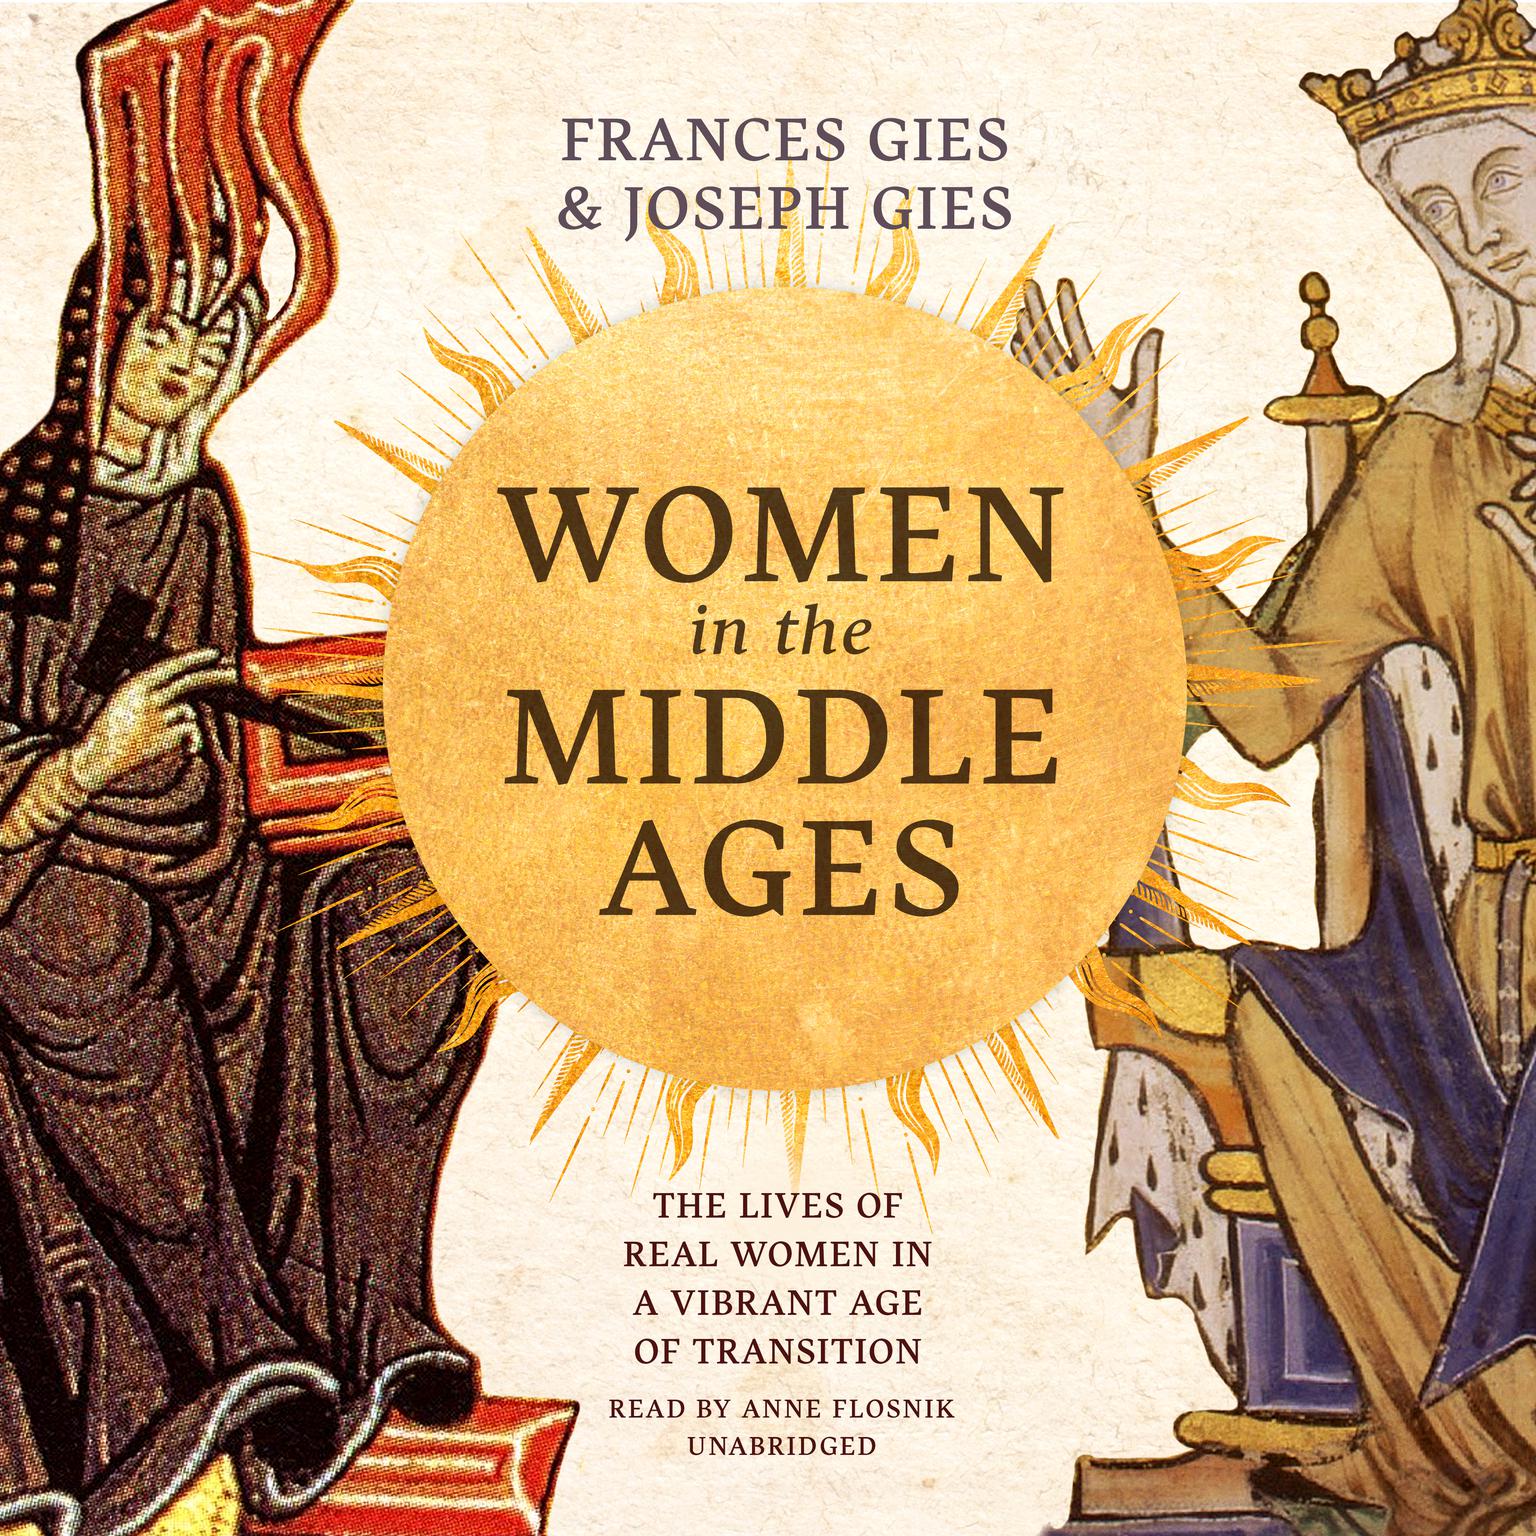 Women in the Middle Ages: The Lives of Real Women in a Vibrant Age of Transition Audiobook, by Frances Gies